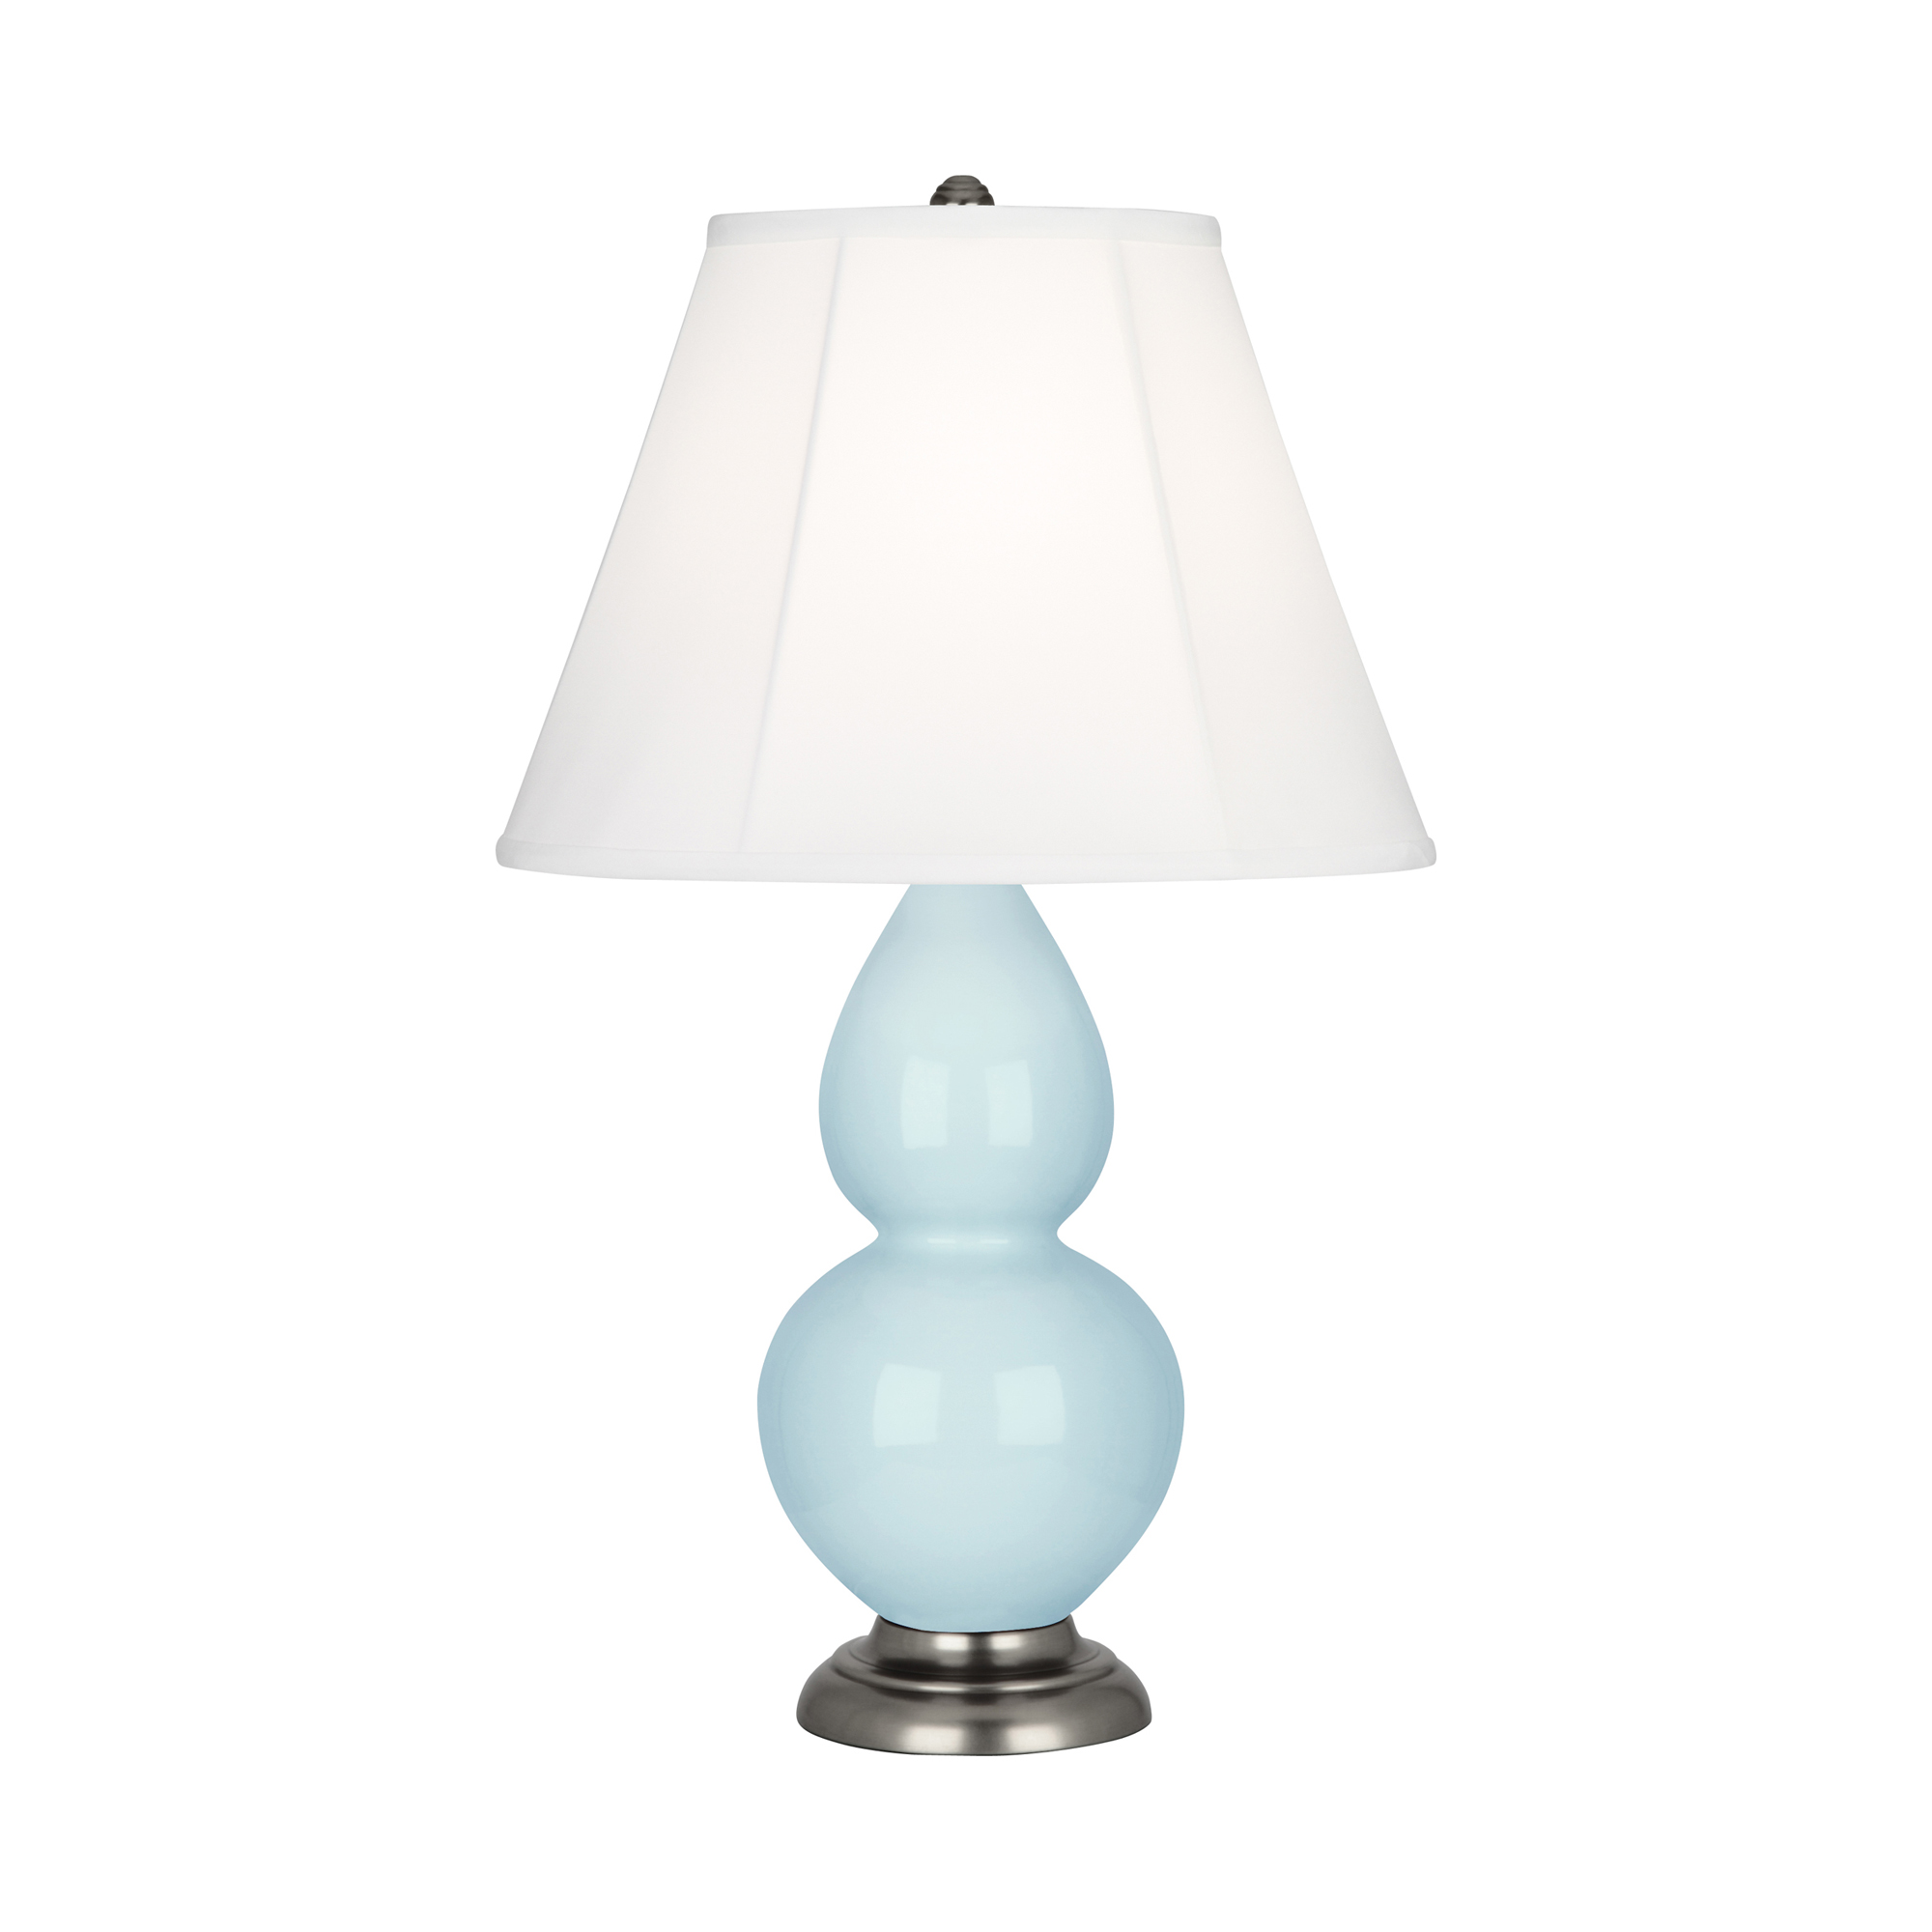 Small Double Gourd Accent Lamp Style #1696